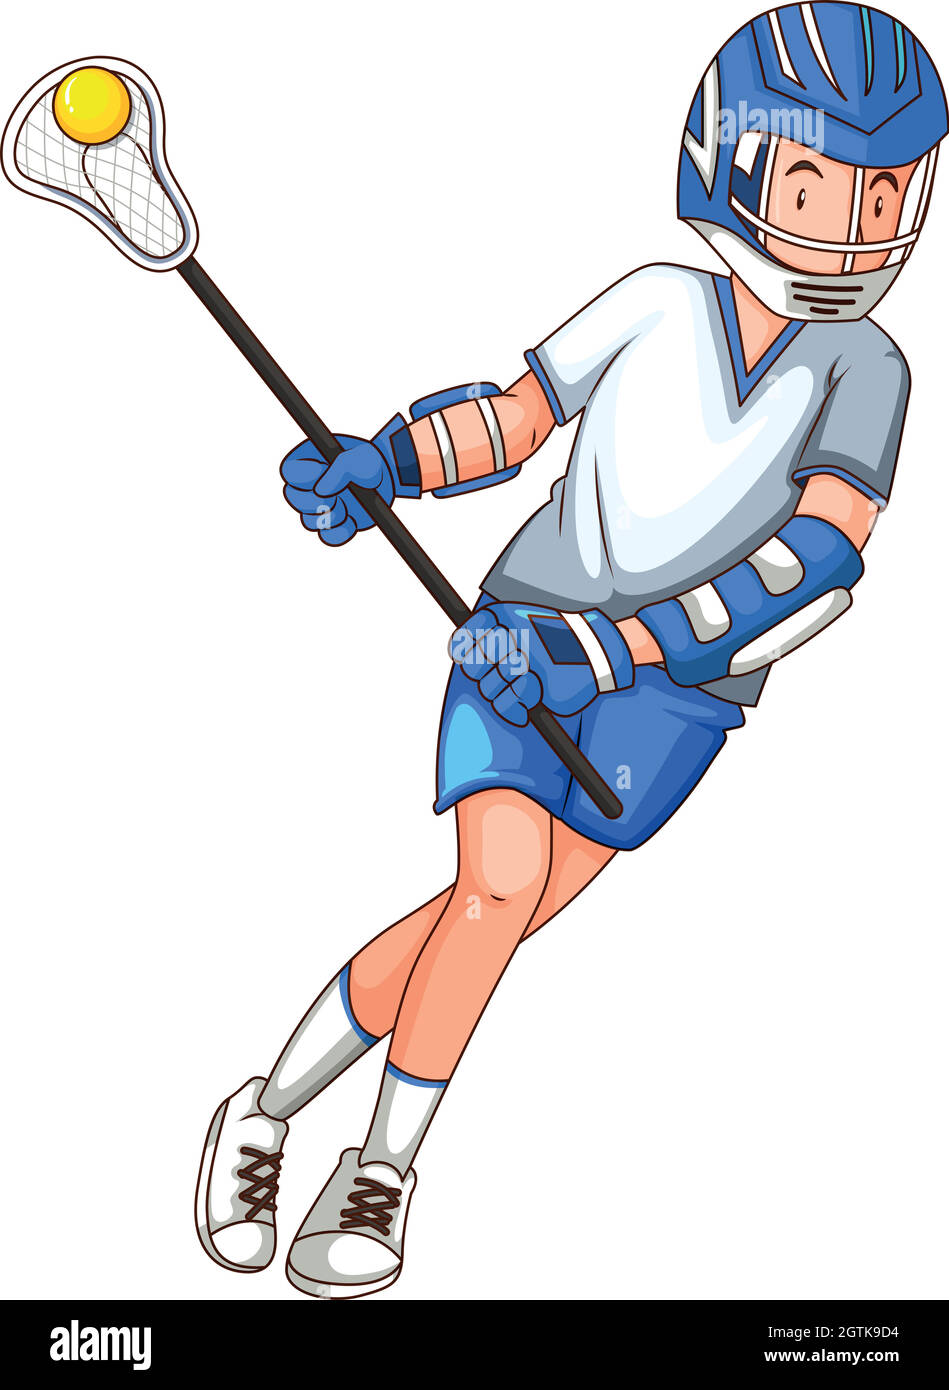 Lacrosse stick stock vector images